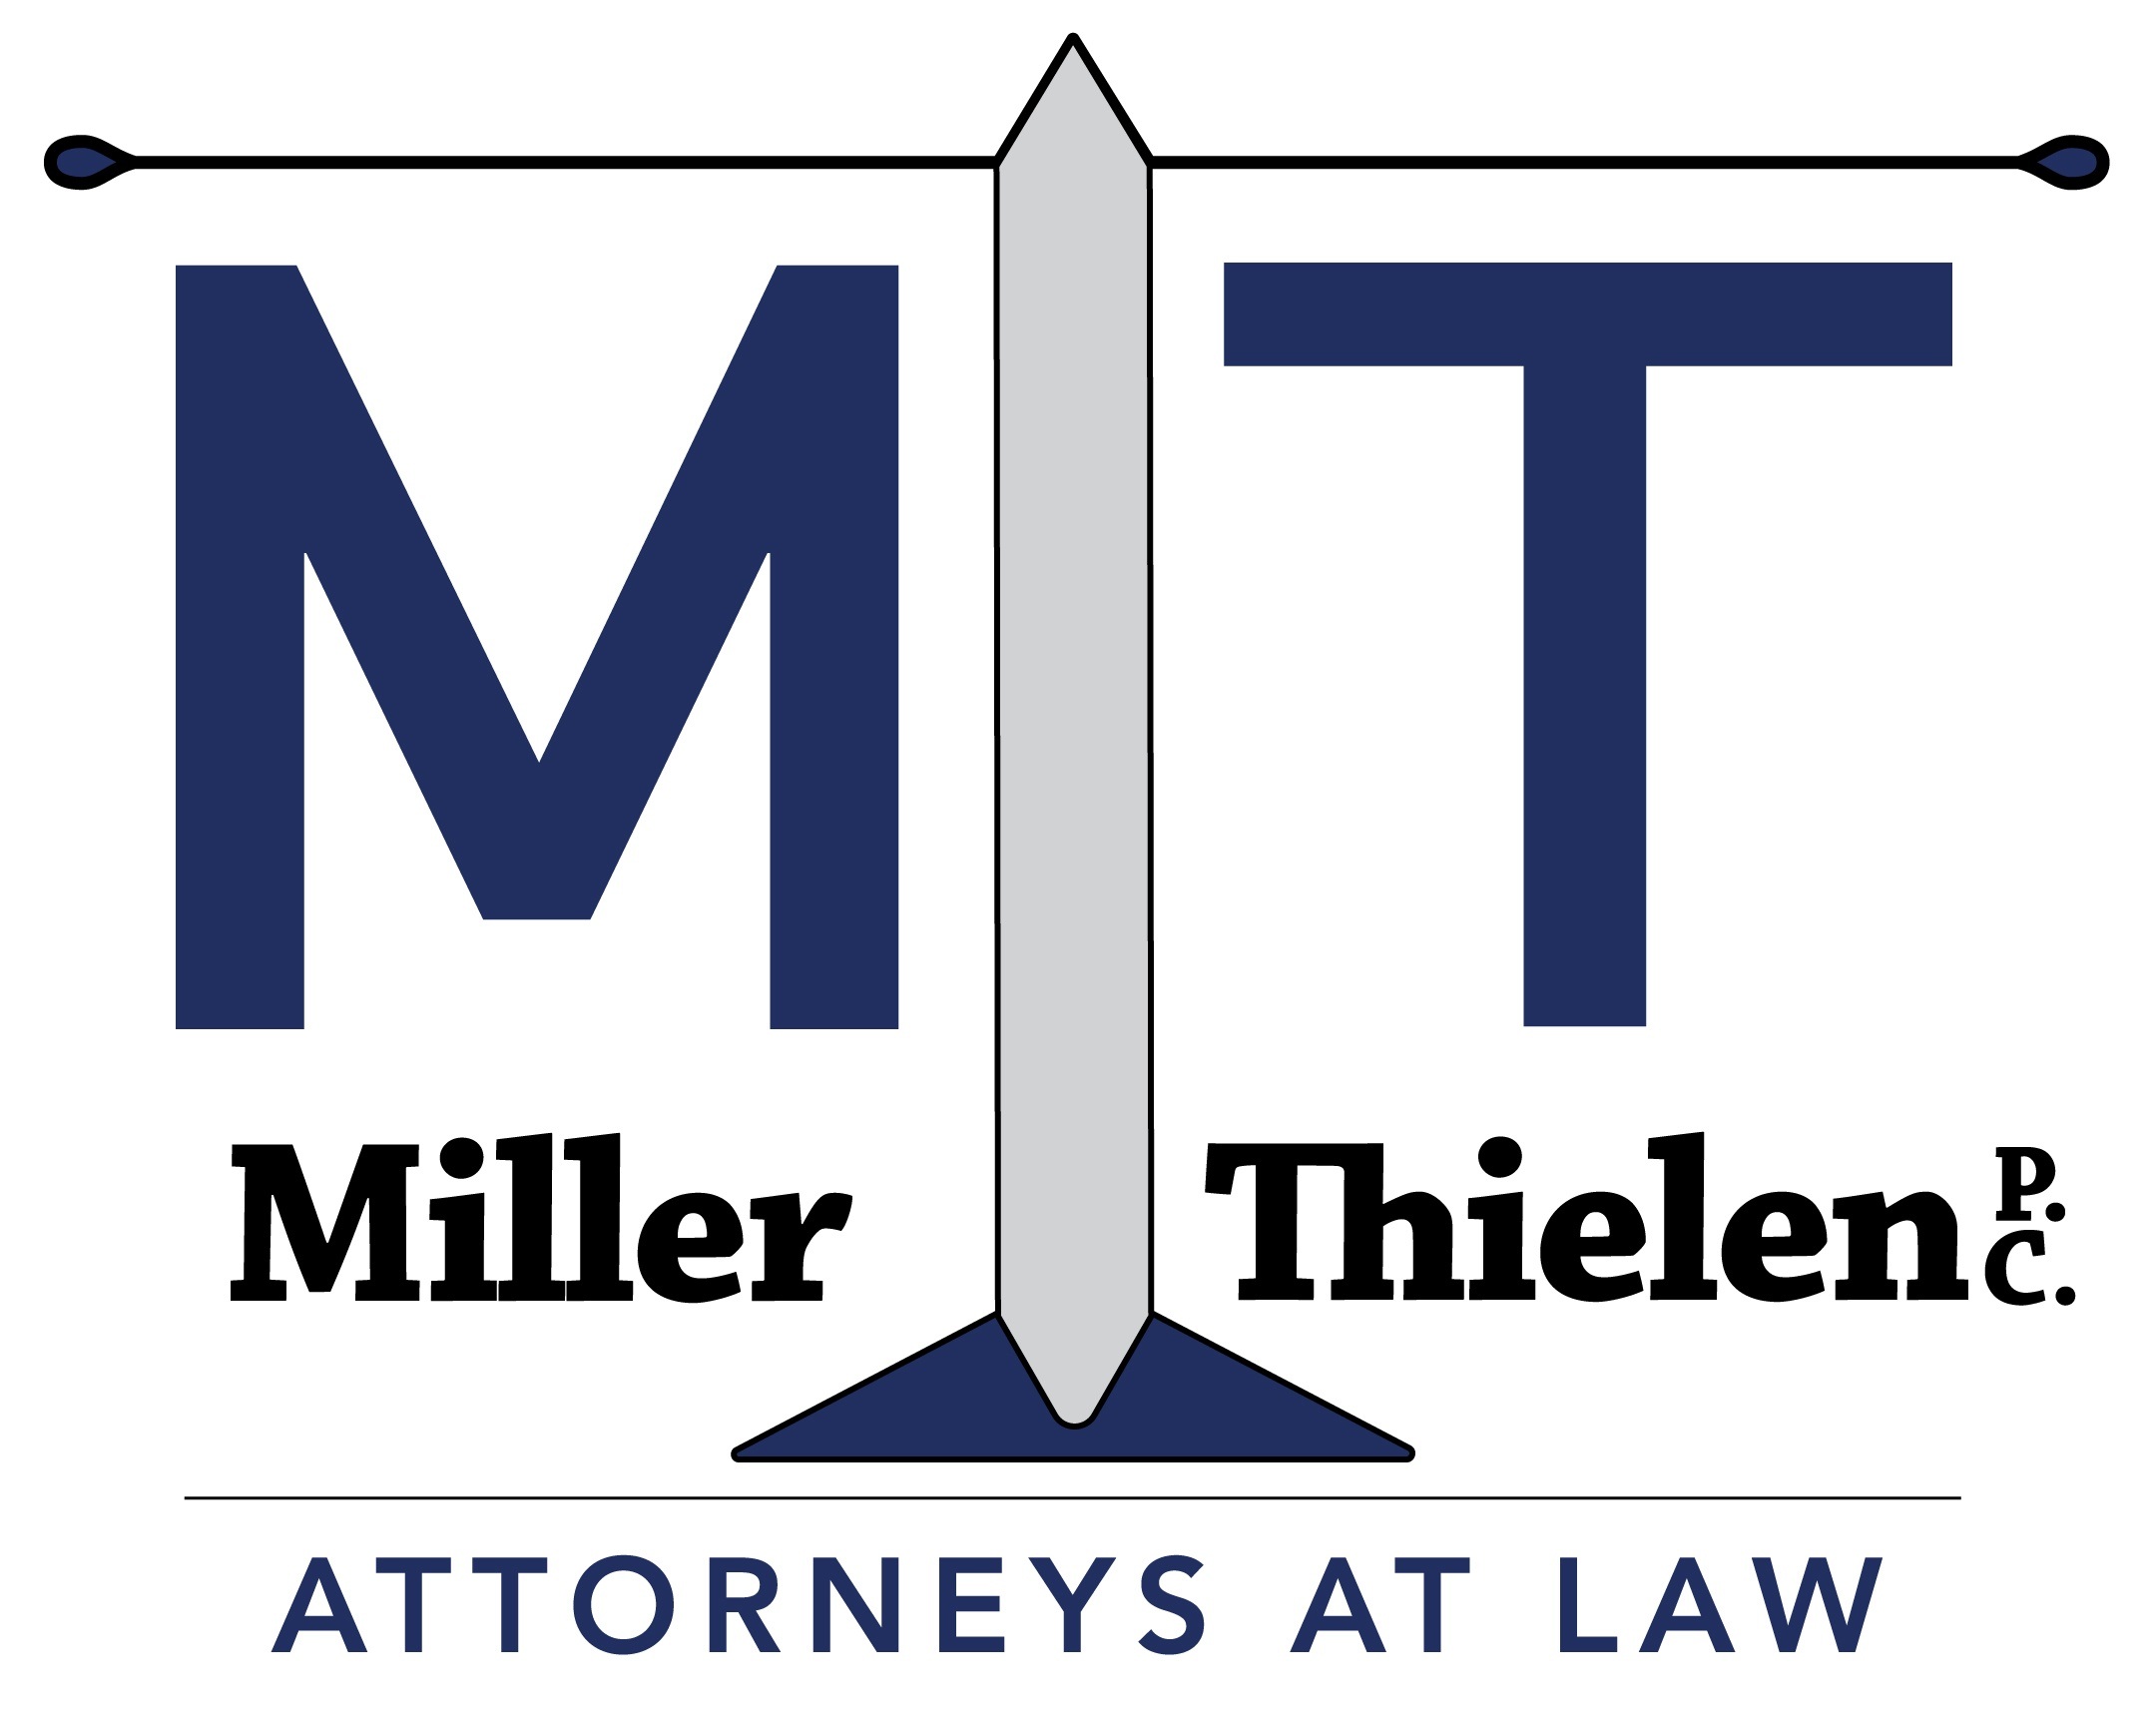 Miller Thielen P.C. Attorneys at Law logo designed by Interlace Communications